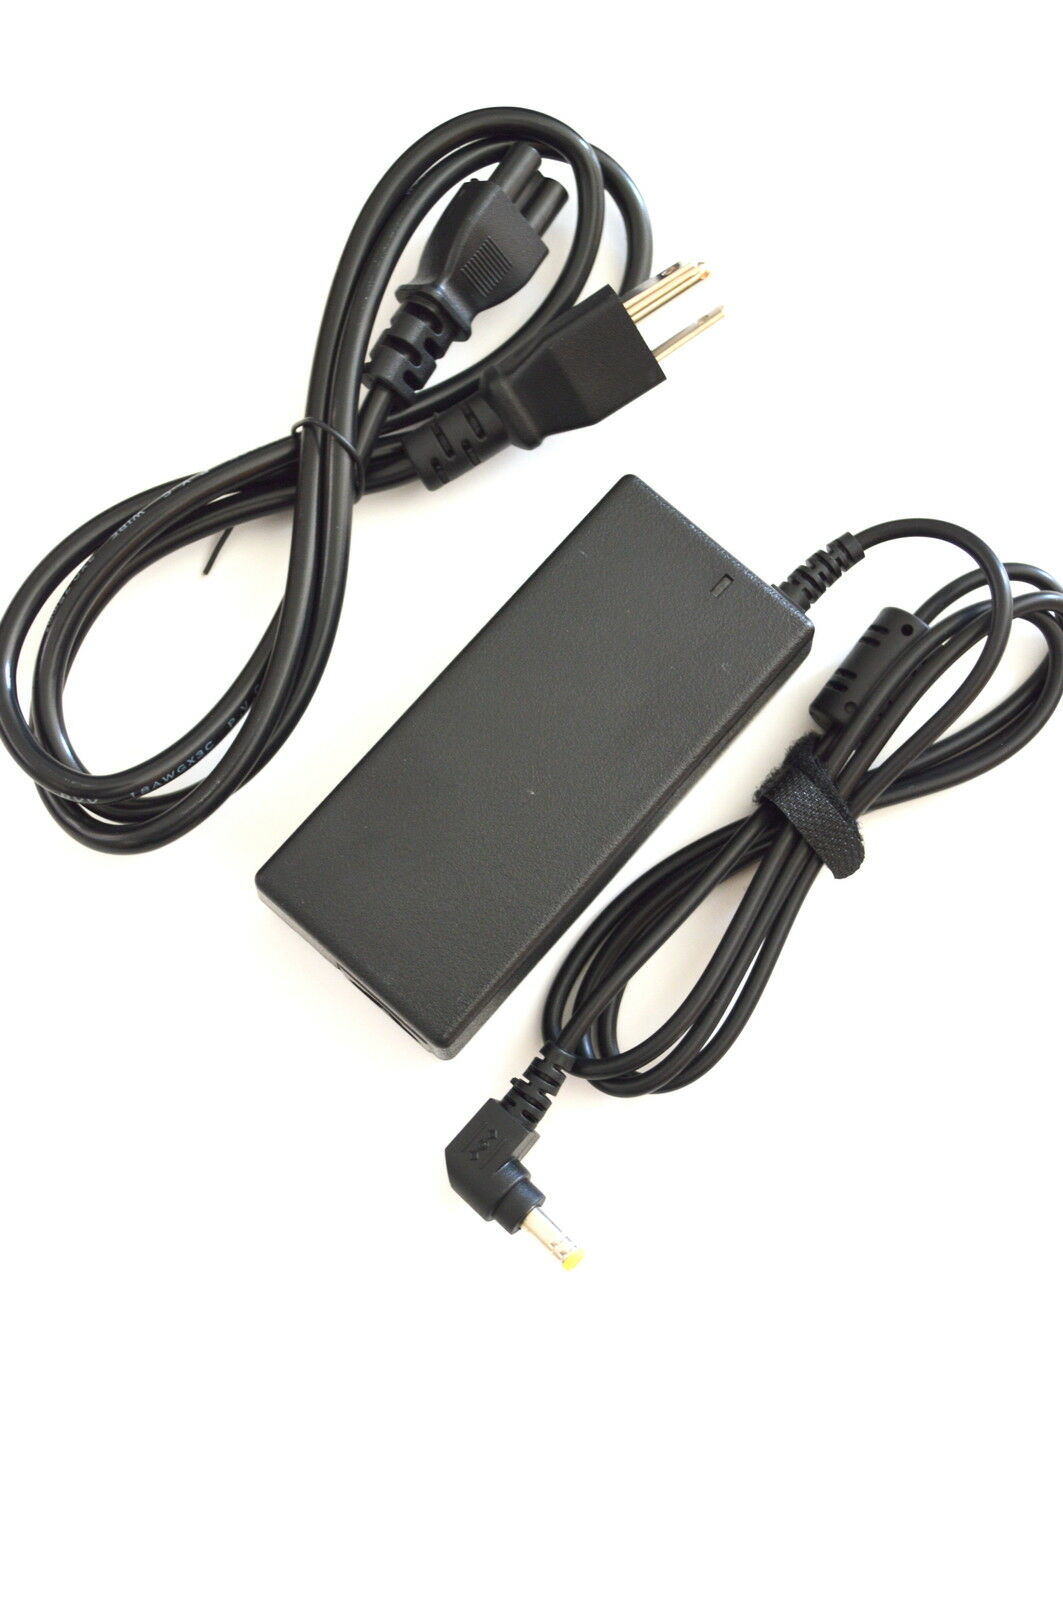 AC Adapter Charger for Lenovo 36001682 42T4458 42T4459 AD8025 PA-1650-65 E591S.